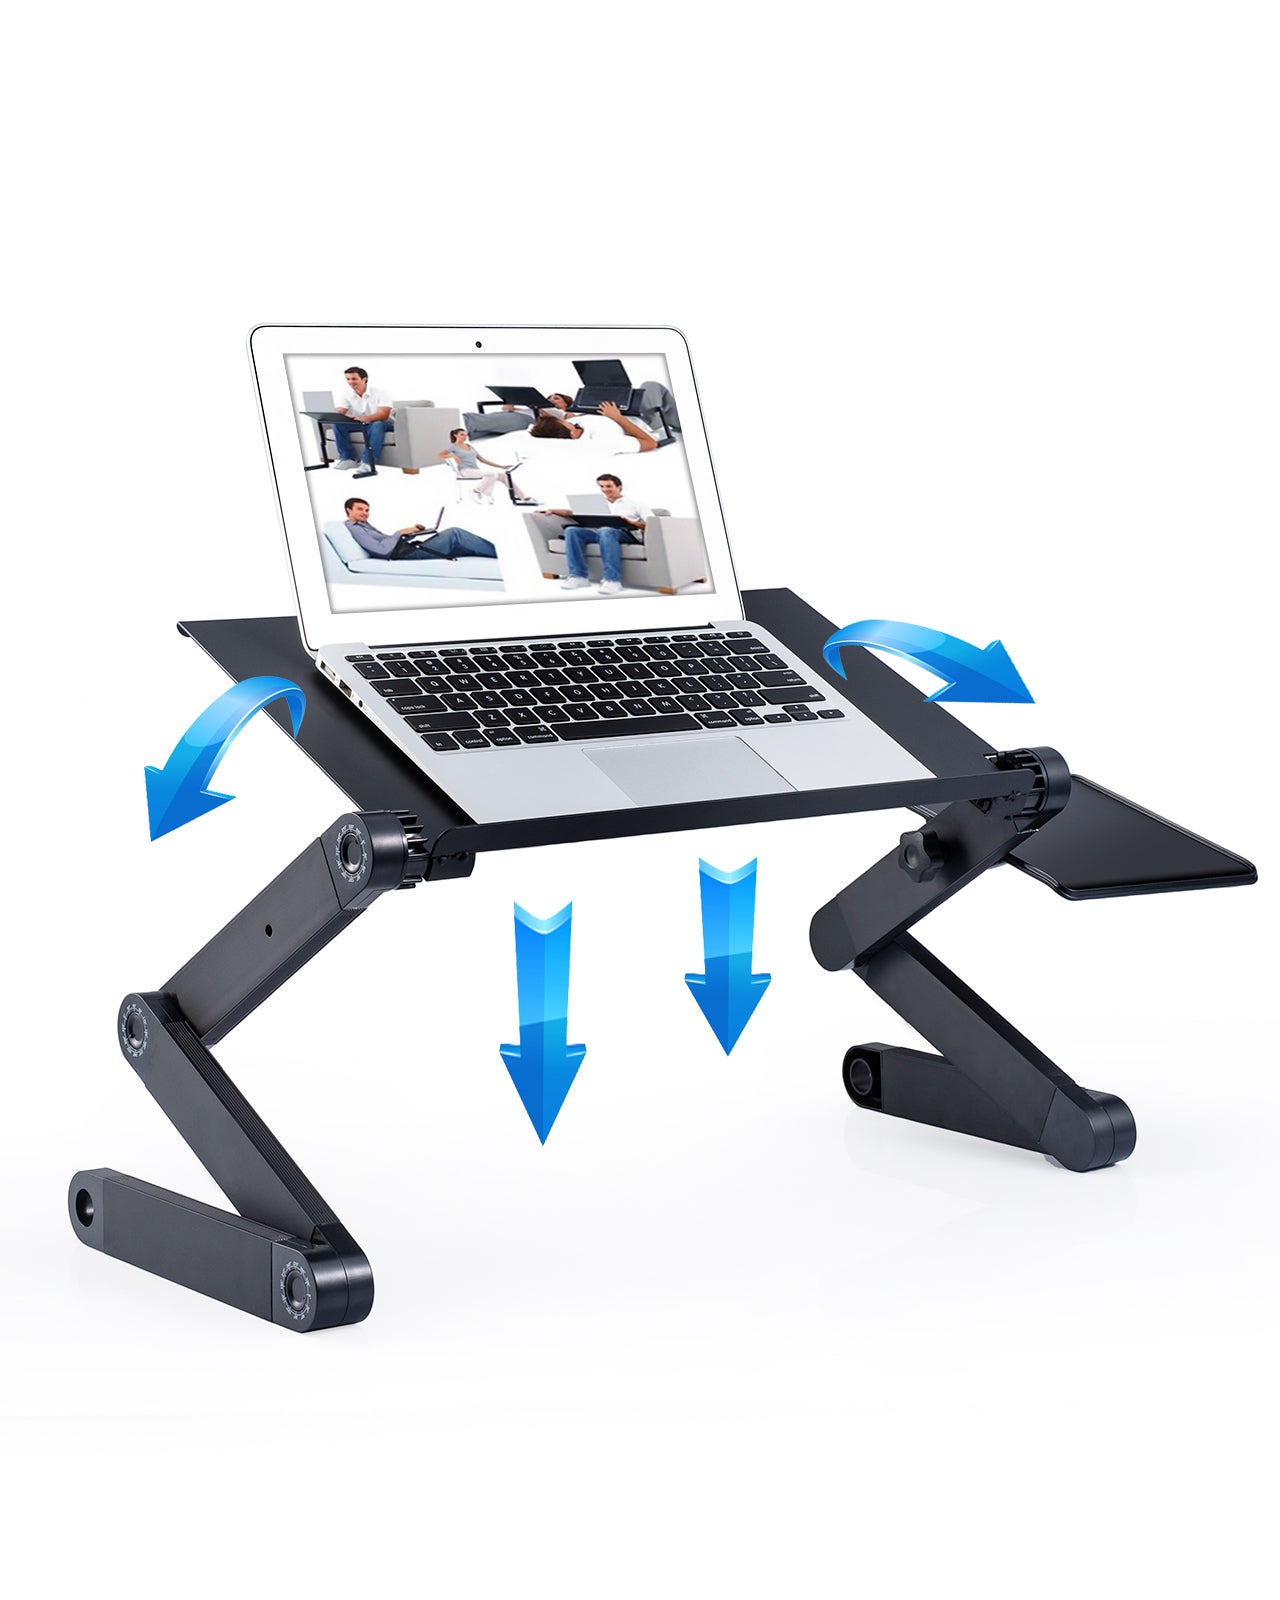 Adjustable Laptop Stand, RAINBEAN Laptop Desk with 2 CPU Cooling USB Fans for Bed Aluminum